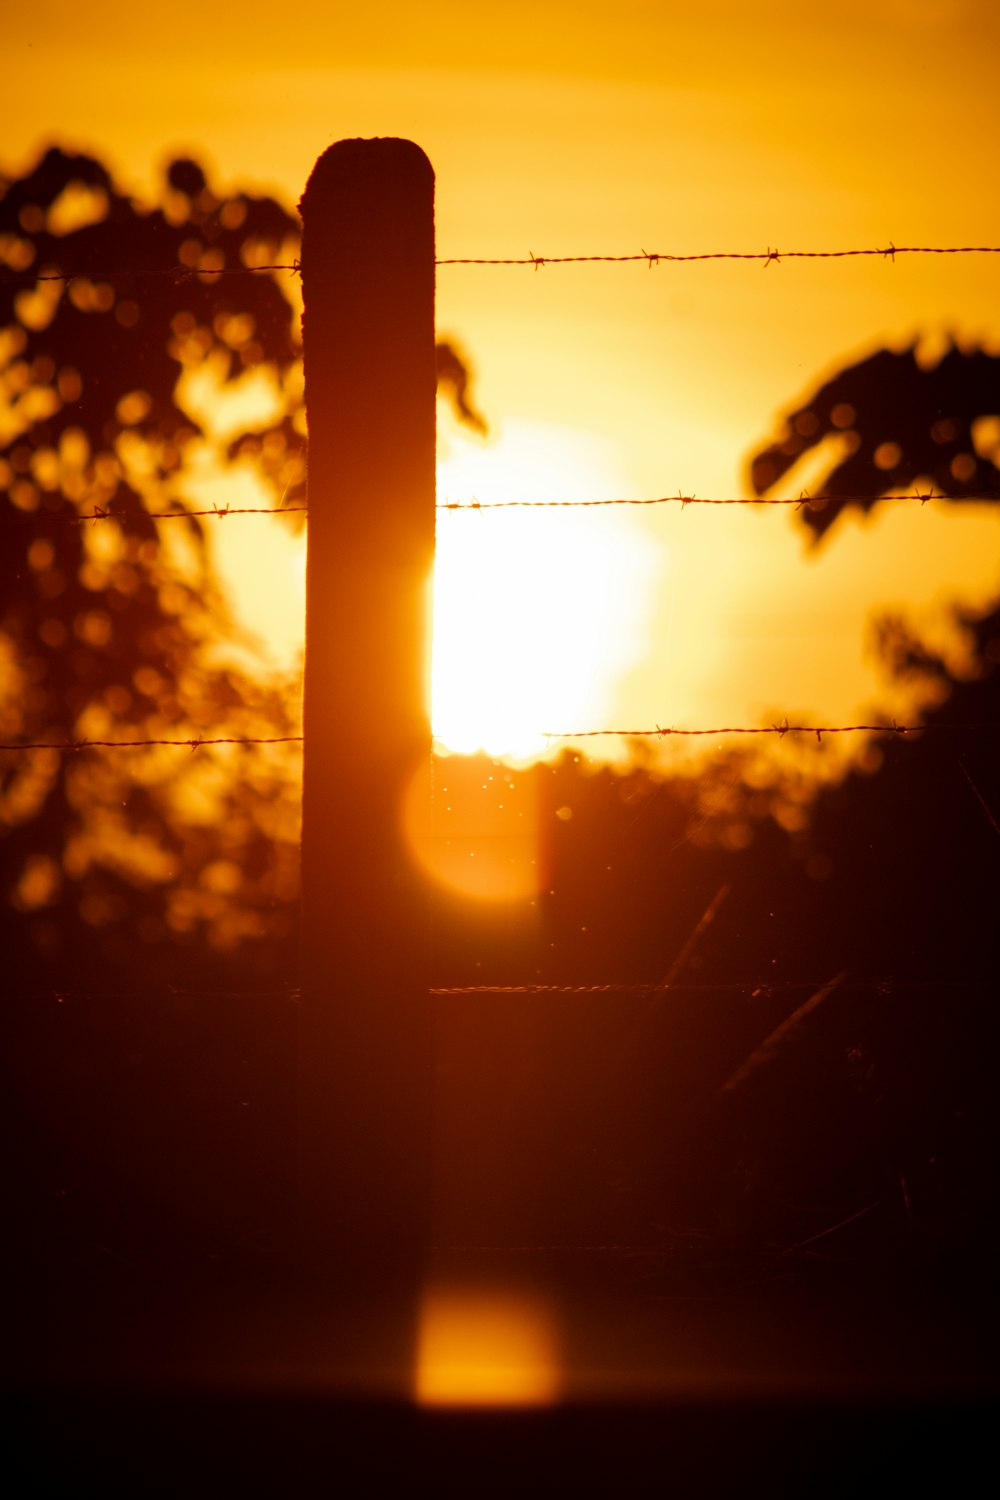 the sun is setting behind a wire fence